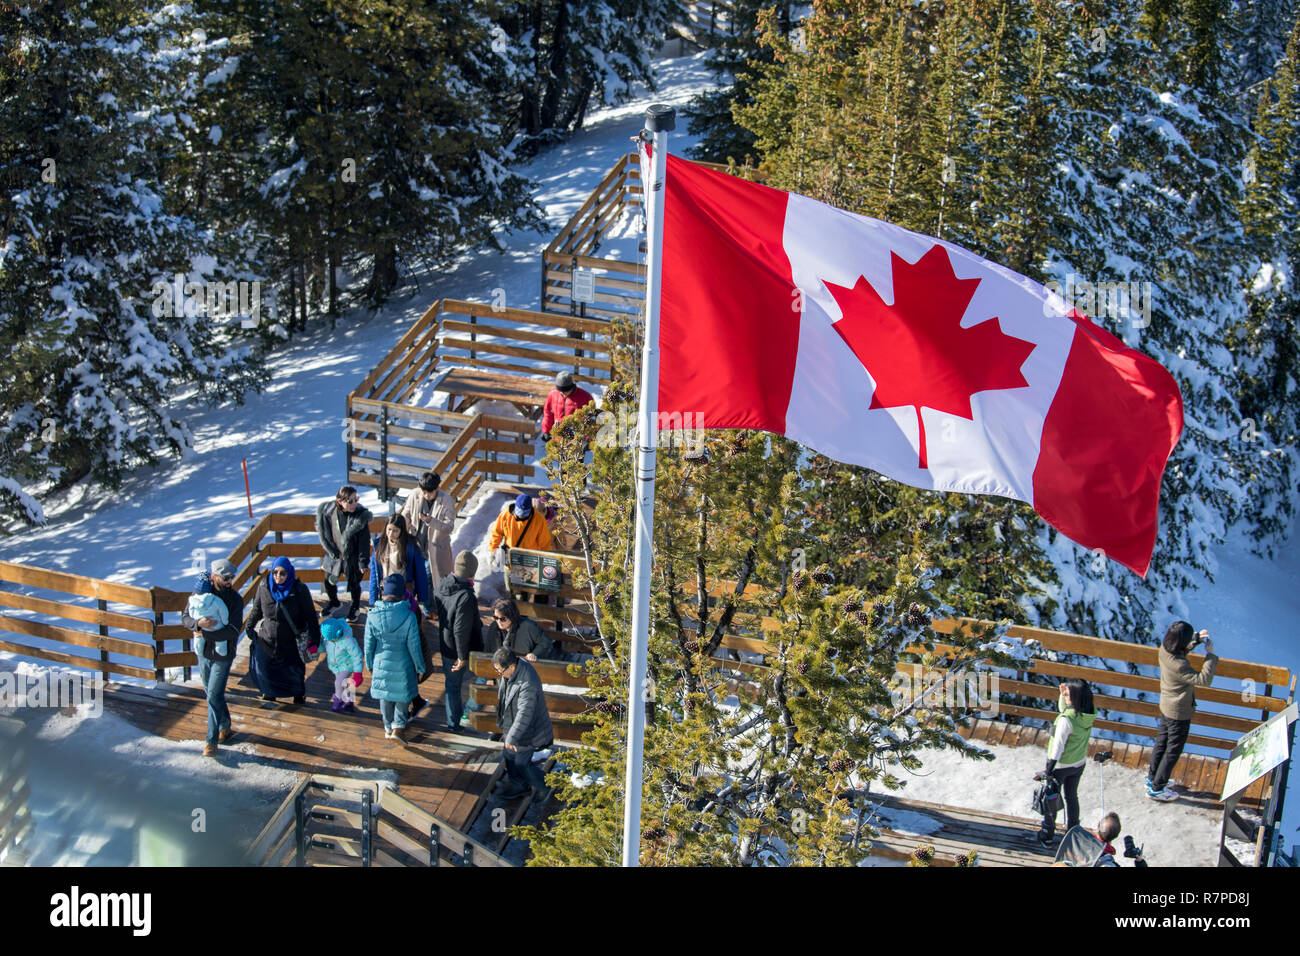 Alberta, Canada - October 7, 2018 : Tourist trails with Canada flag at Sulphur Mountains, Banff national park Stock Photo